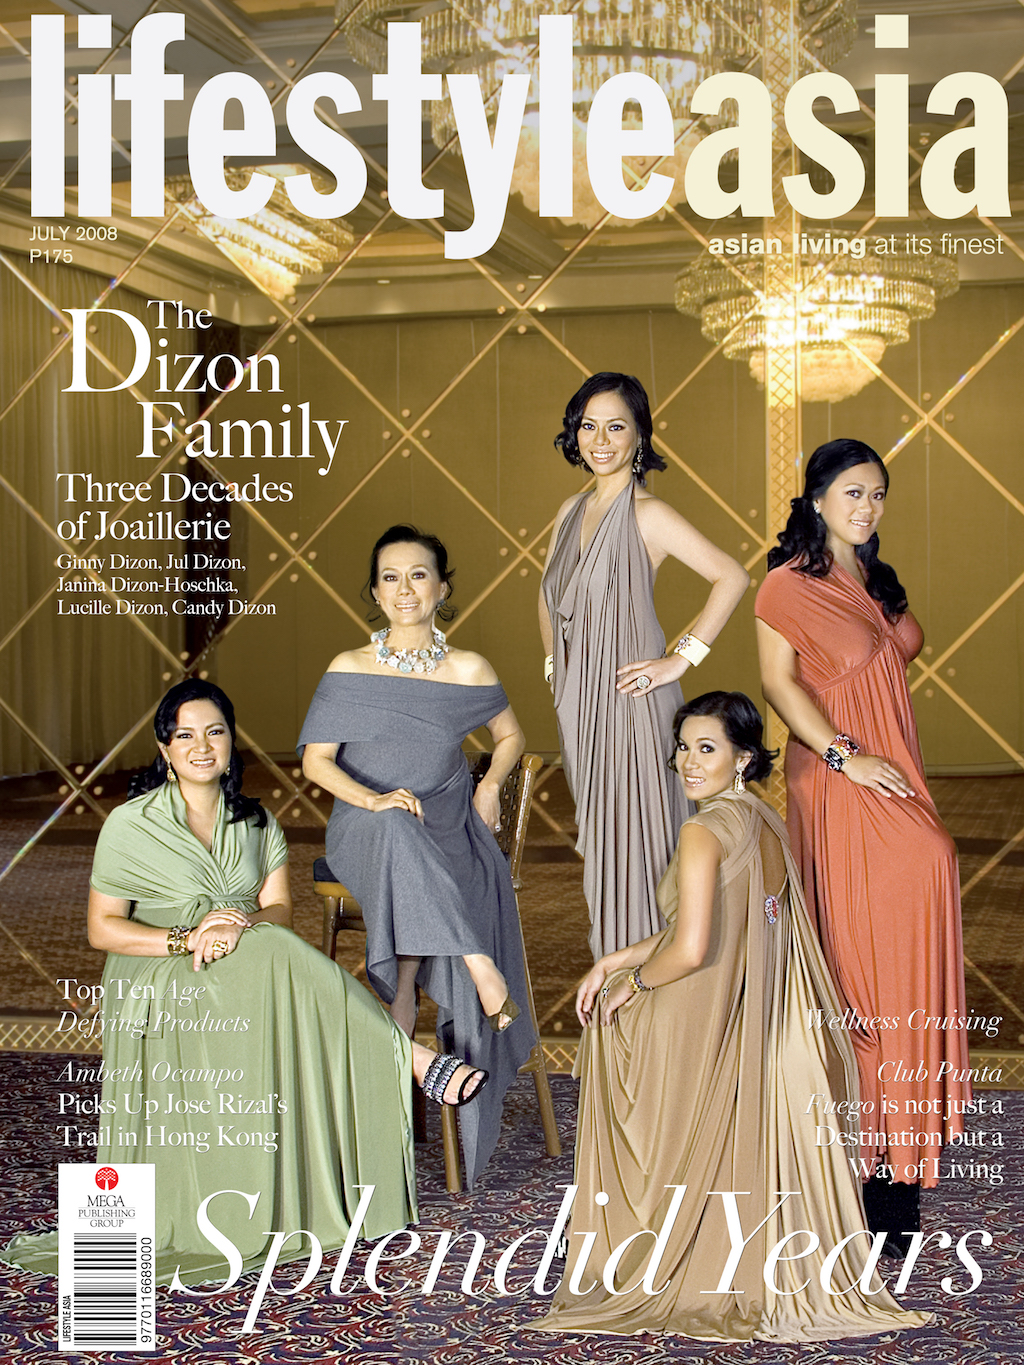 The Dizon women graced the cover of Lifestyle Asia for their 30th anniversary in 2008